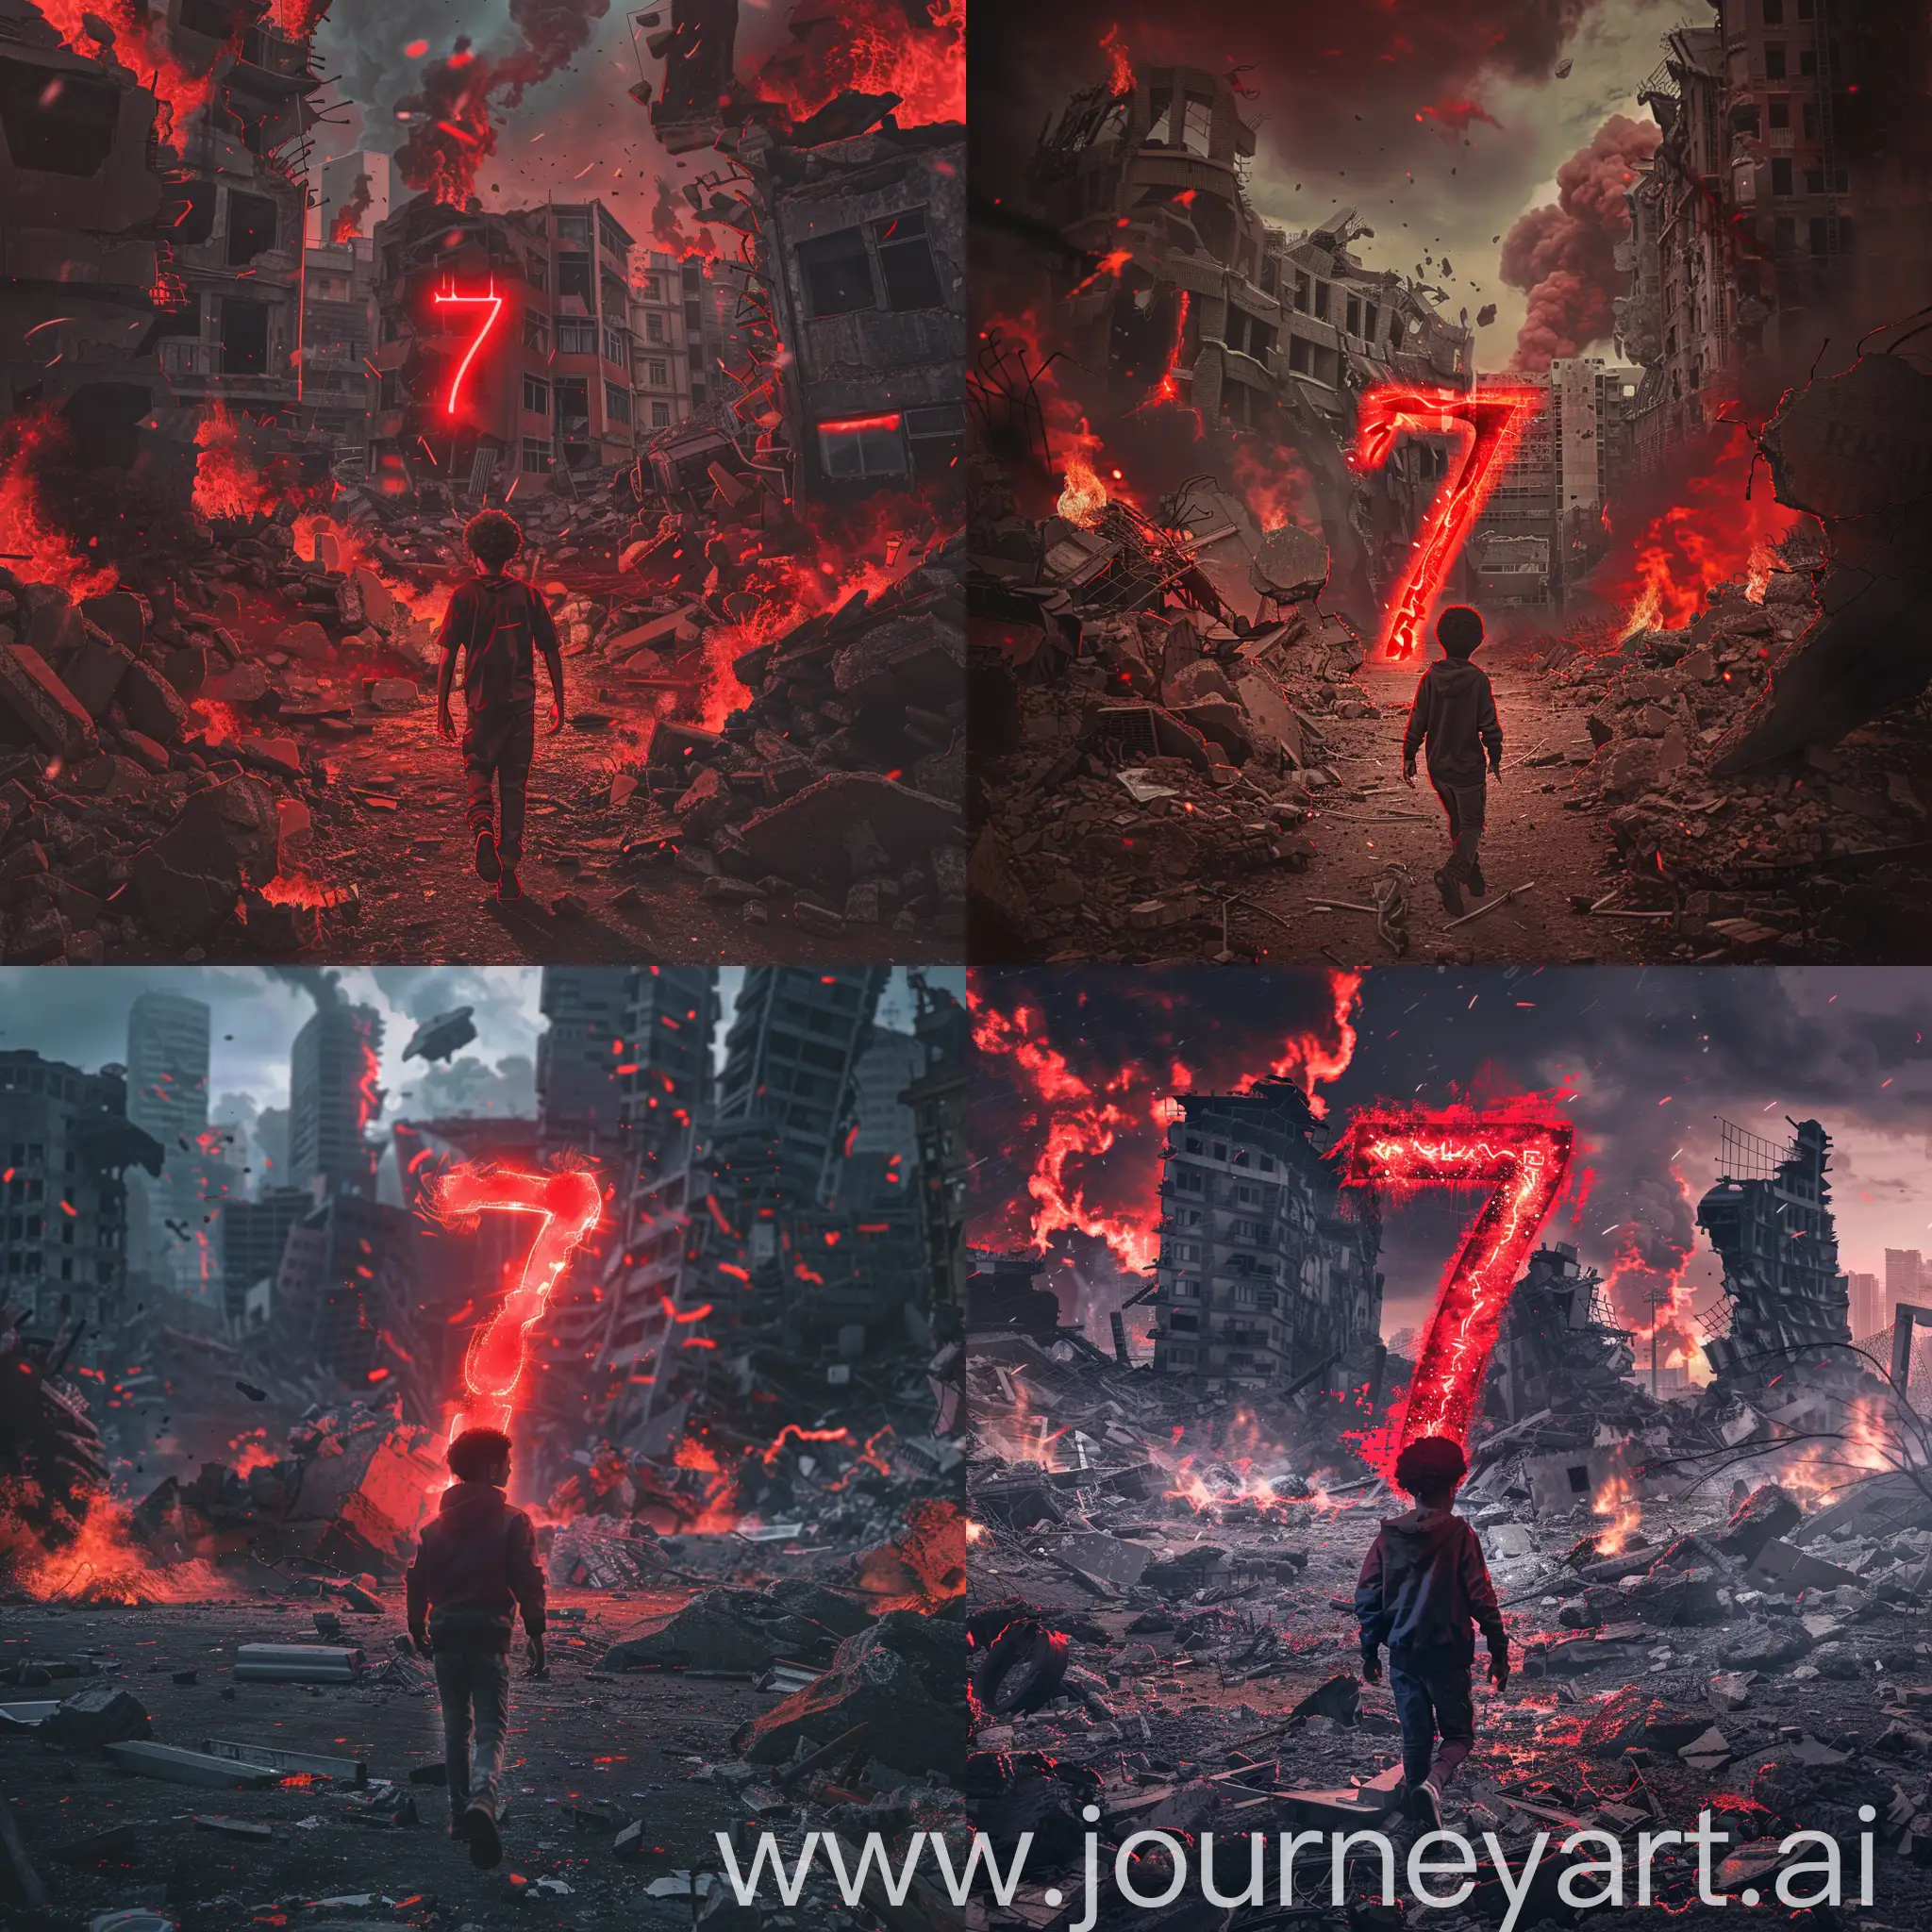 Please create a realistic image of the end of the world and buildings are crumbled and there are red flames everywhere and a black teenage kid is walking torwards a glowing red number 7 that looks good and is going going to give him powers